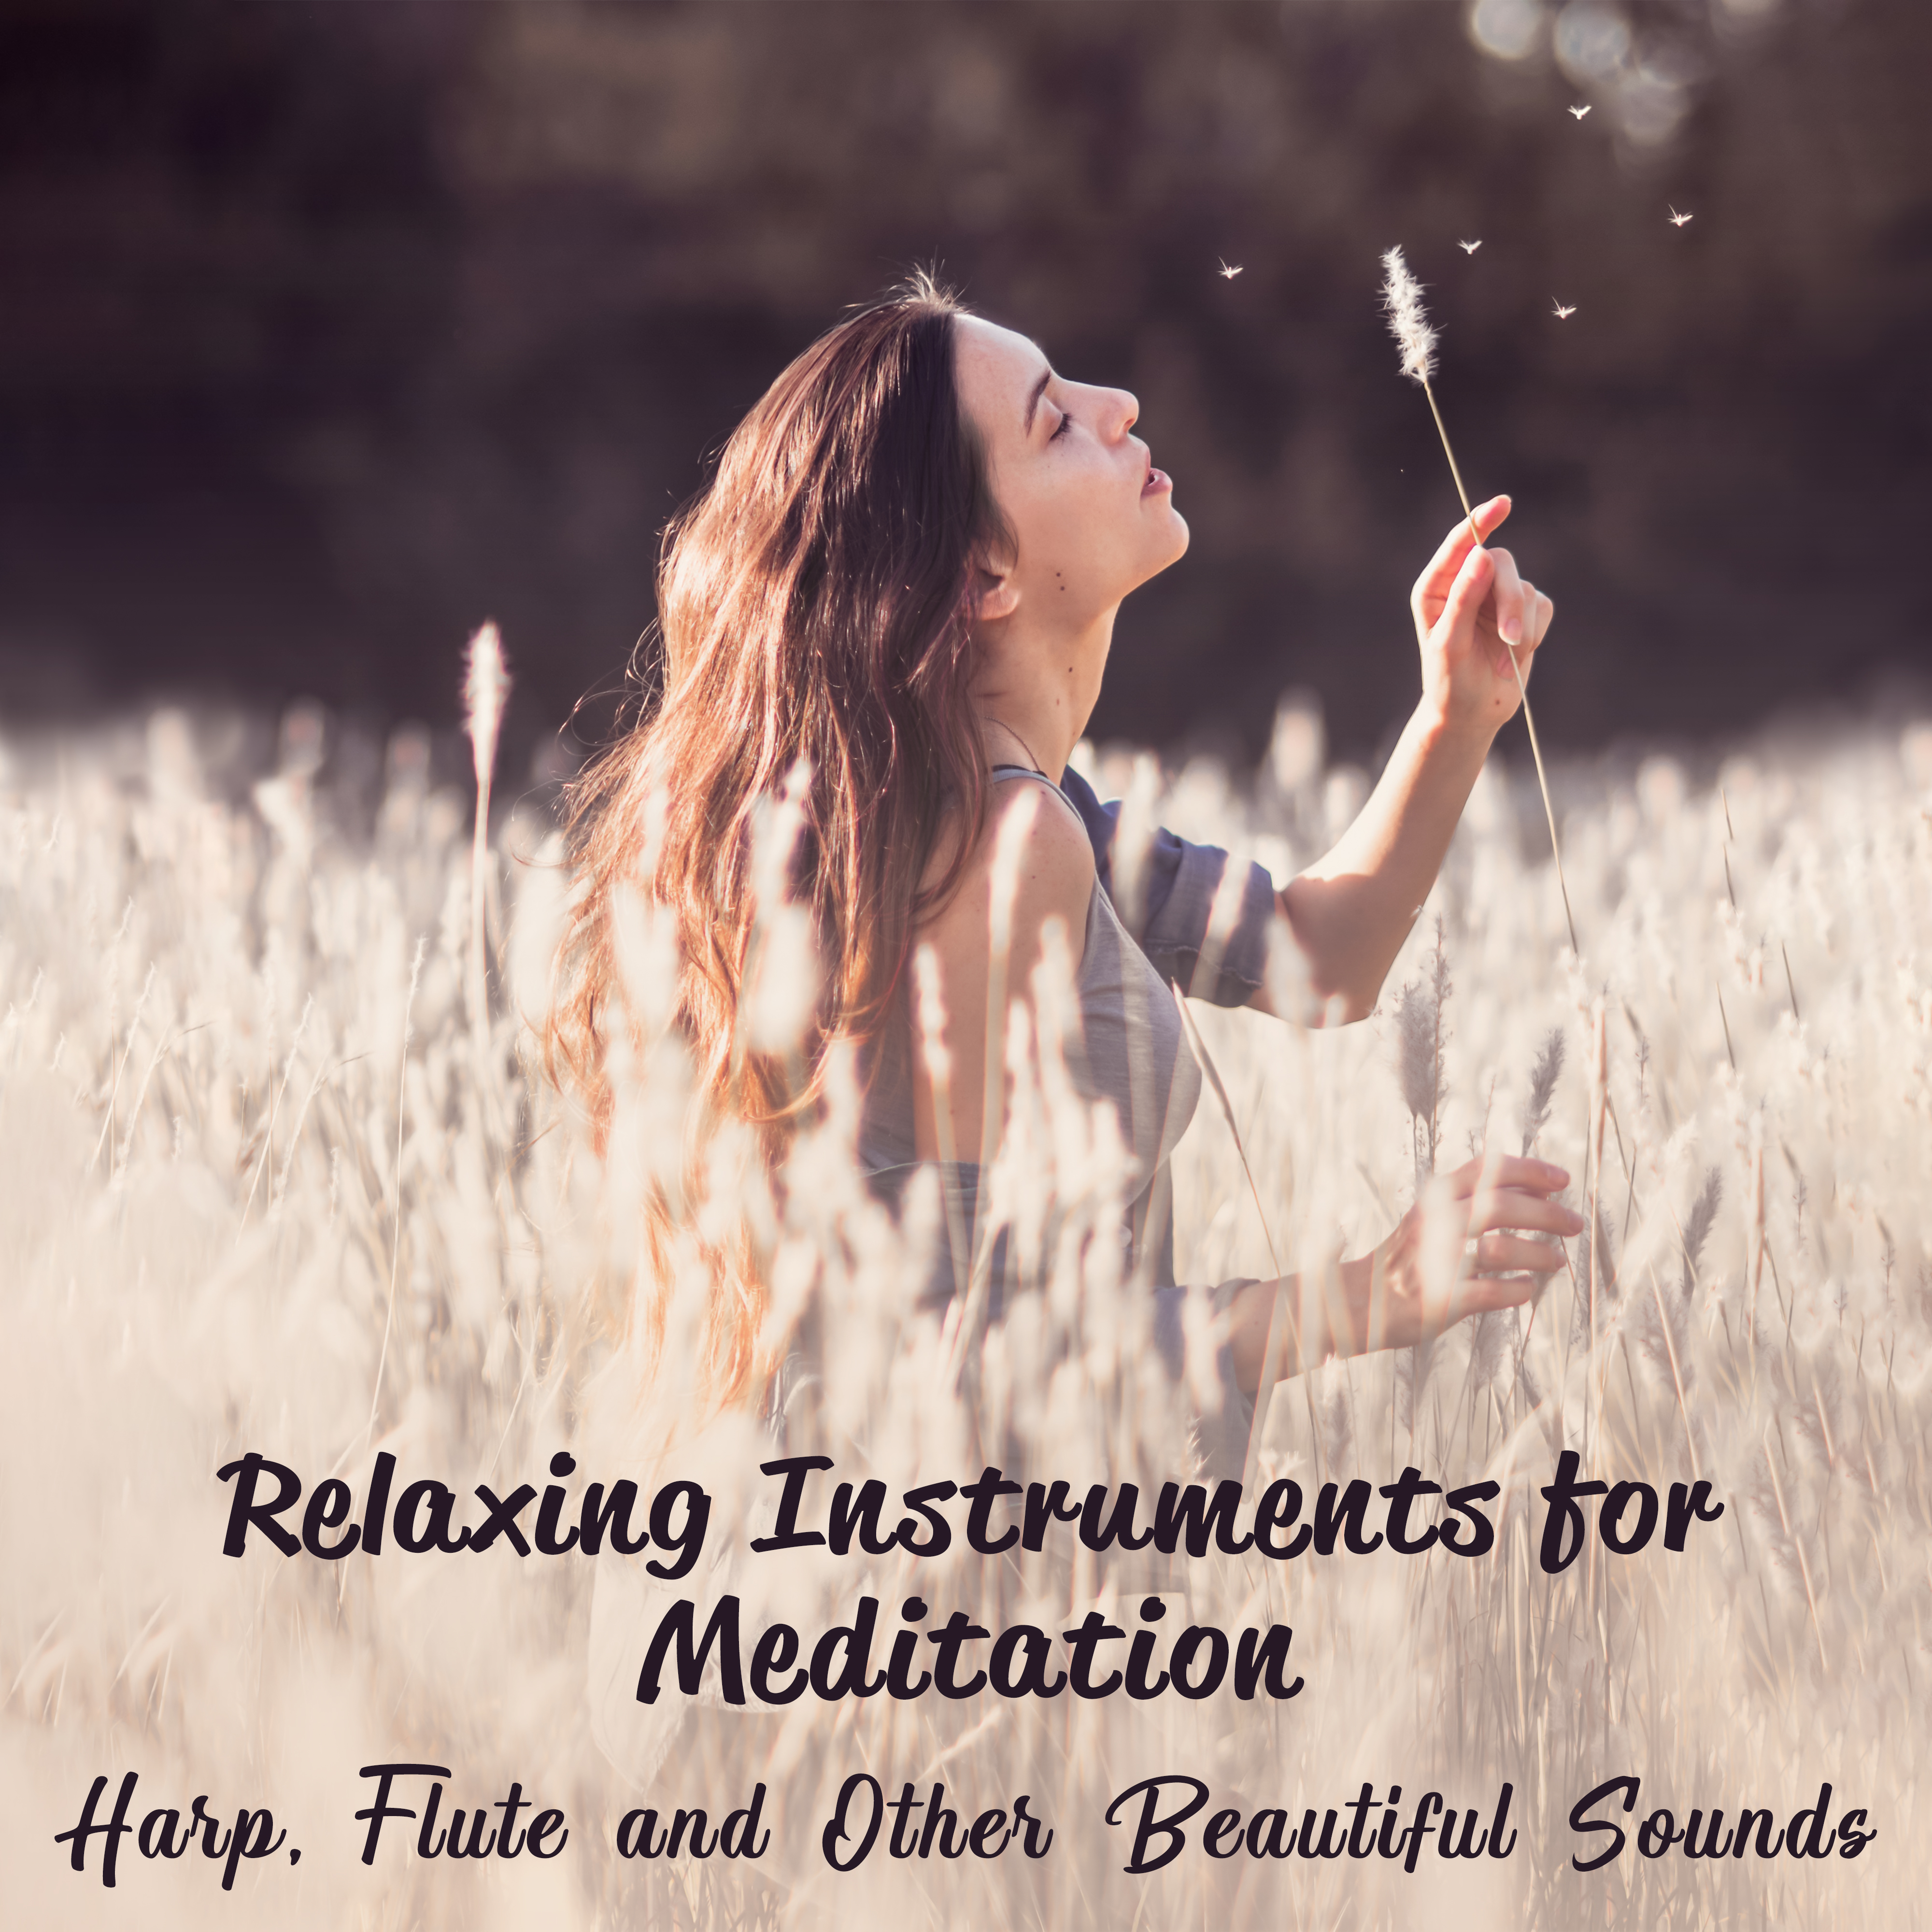 Relaxing Instruments for Meditation: Harp, Flute and Other Beautiful Sounds